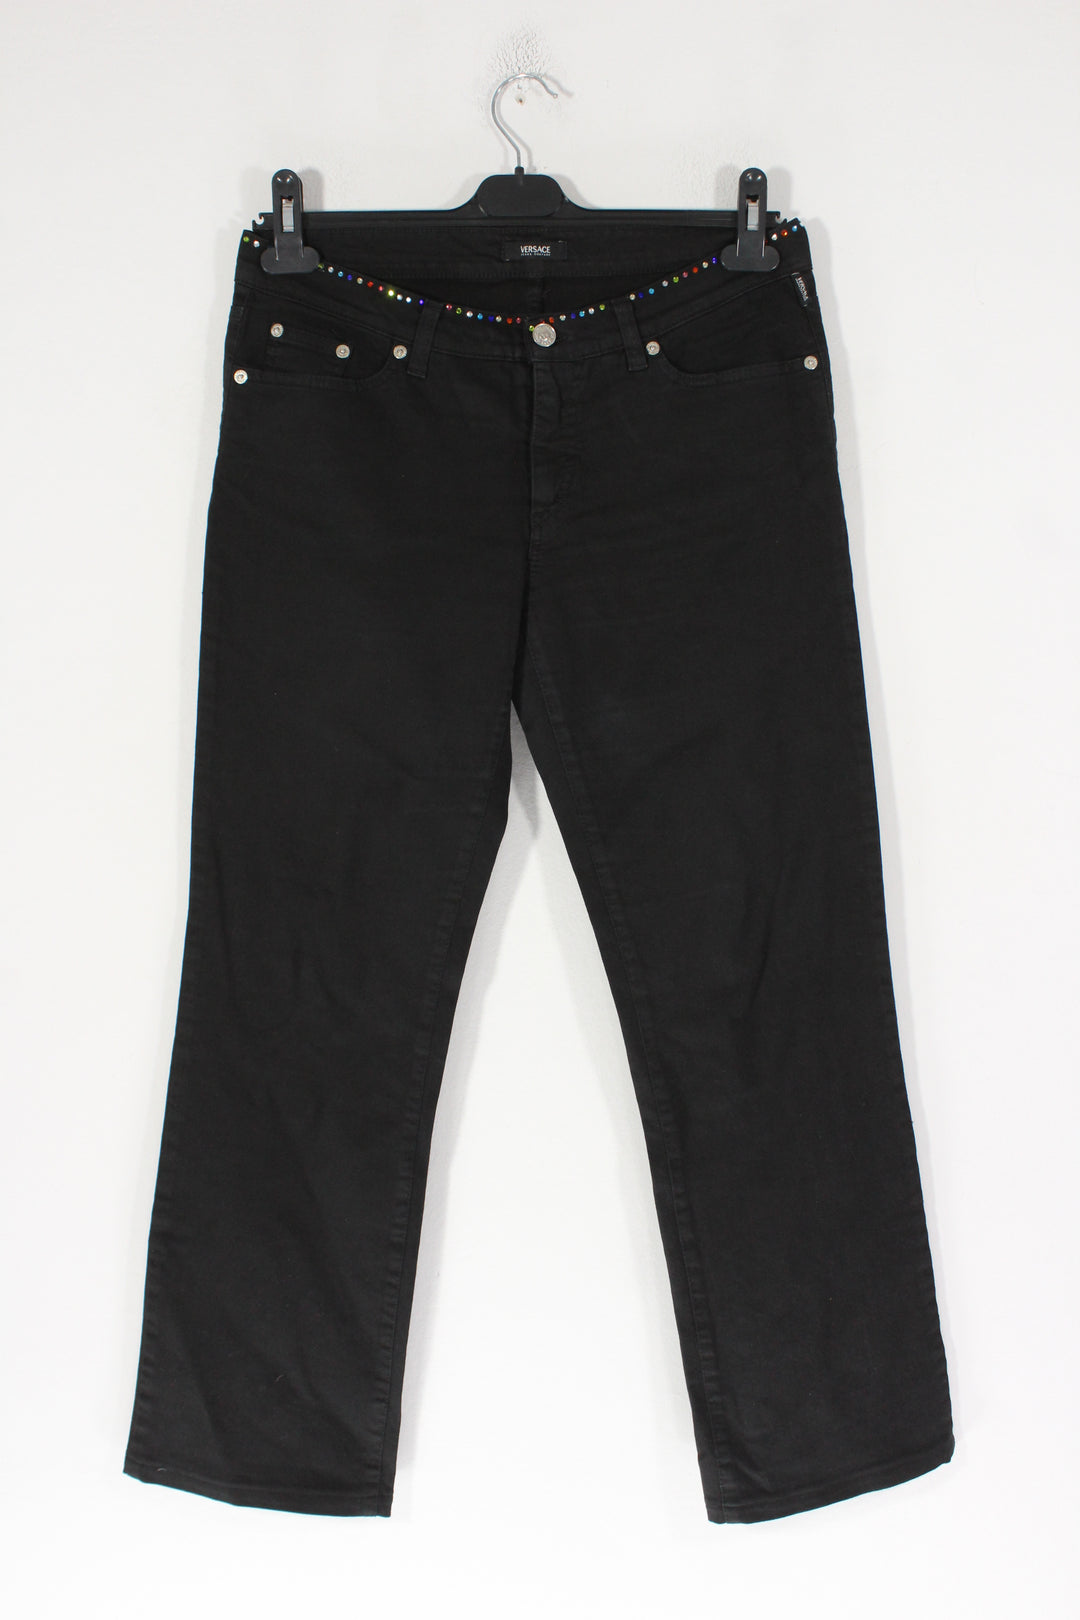 Versace Low Waisted Jeans Women's Small(36)